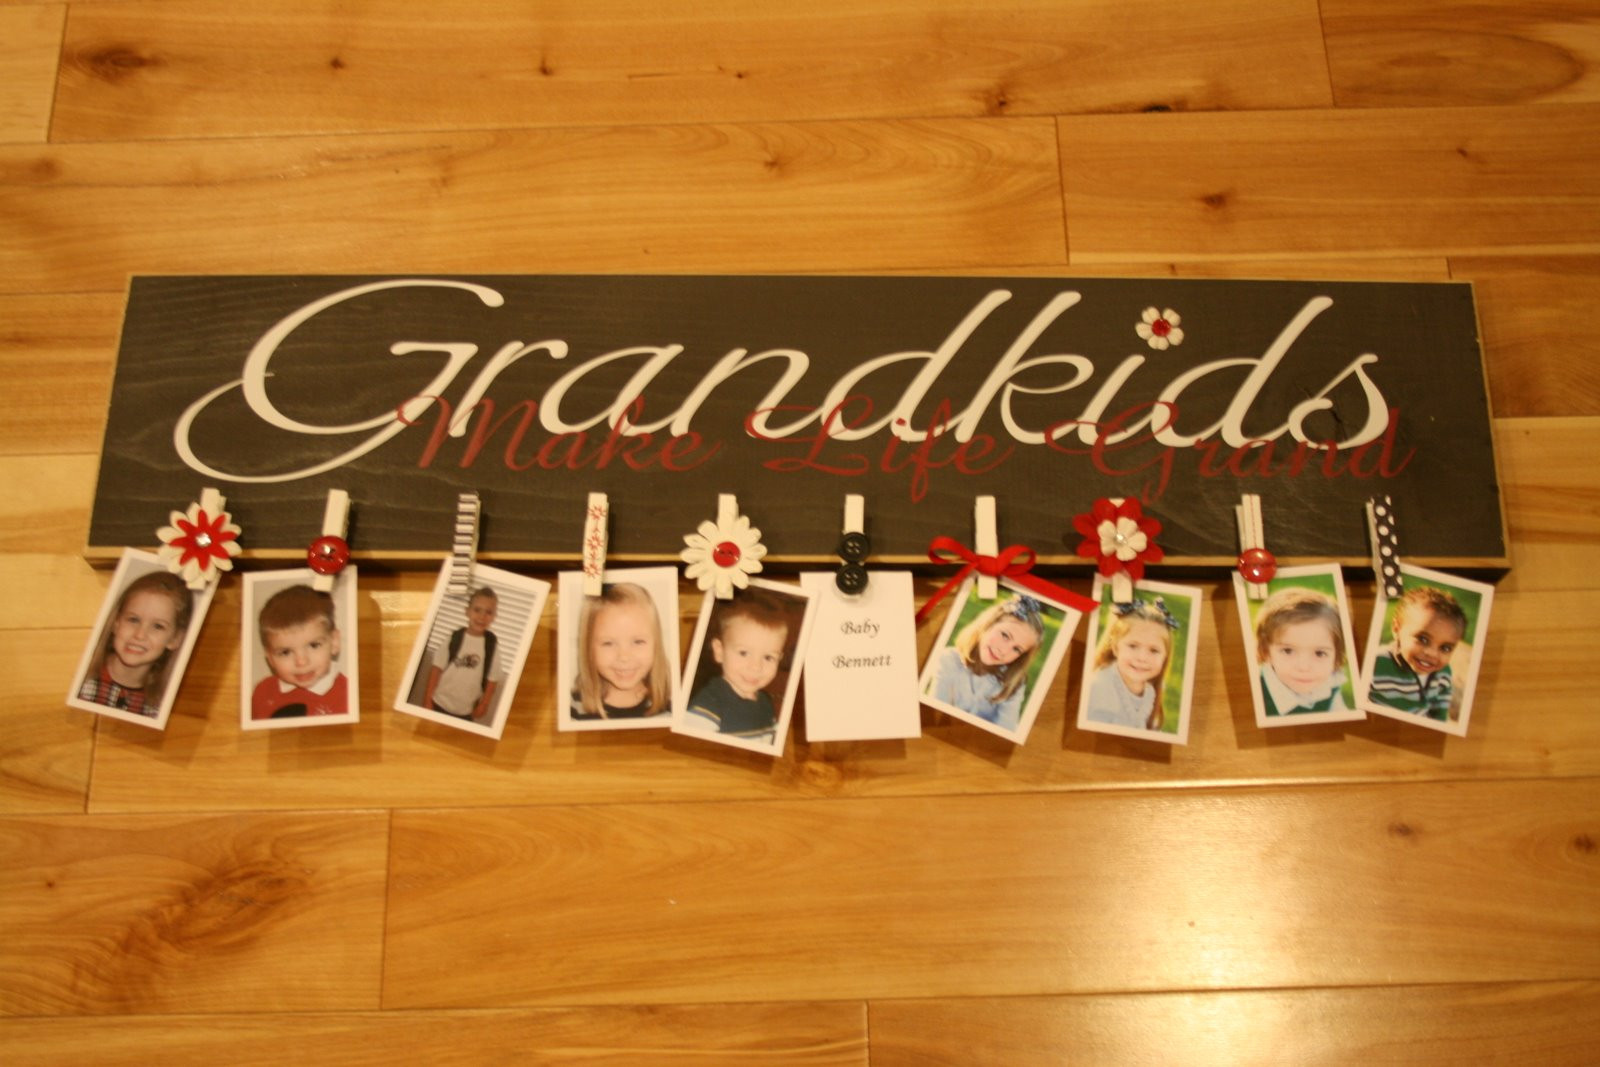 Grandmother Gift Ideas
 8 of my favorite Gift Ideas for Grandma for Mothers Day